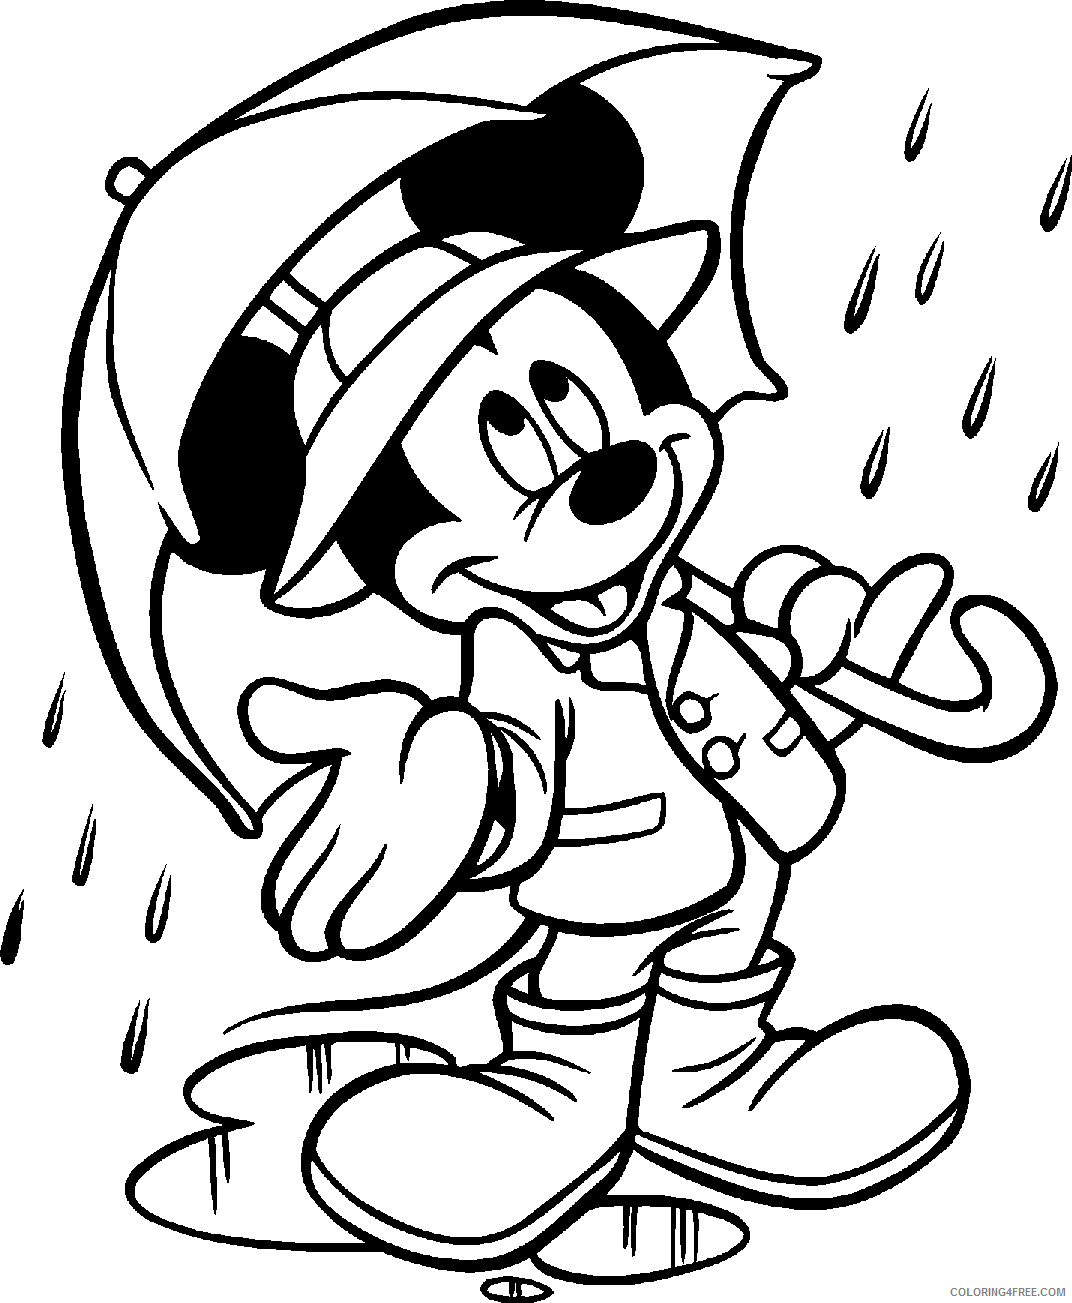 Mickey Mouse Coloring Pages Cartoons Mickey Mouse Printable 2020 4111 Coloring4free